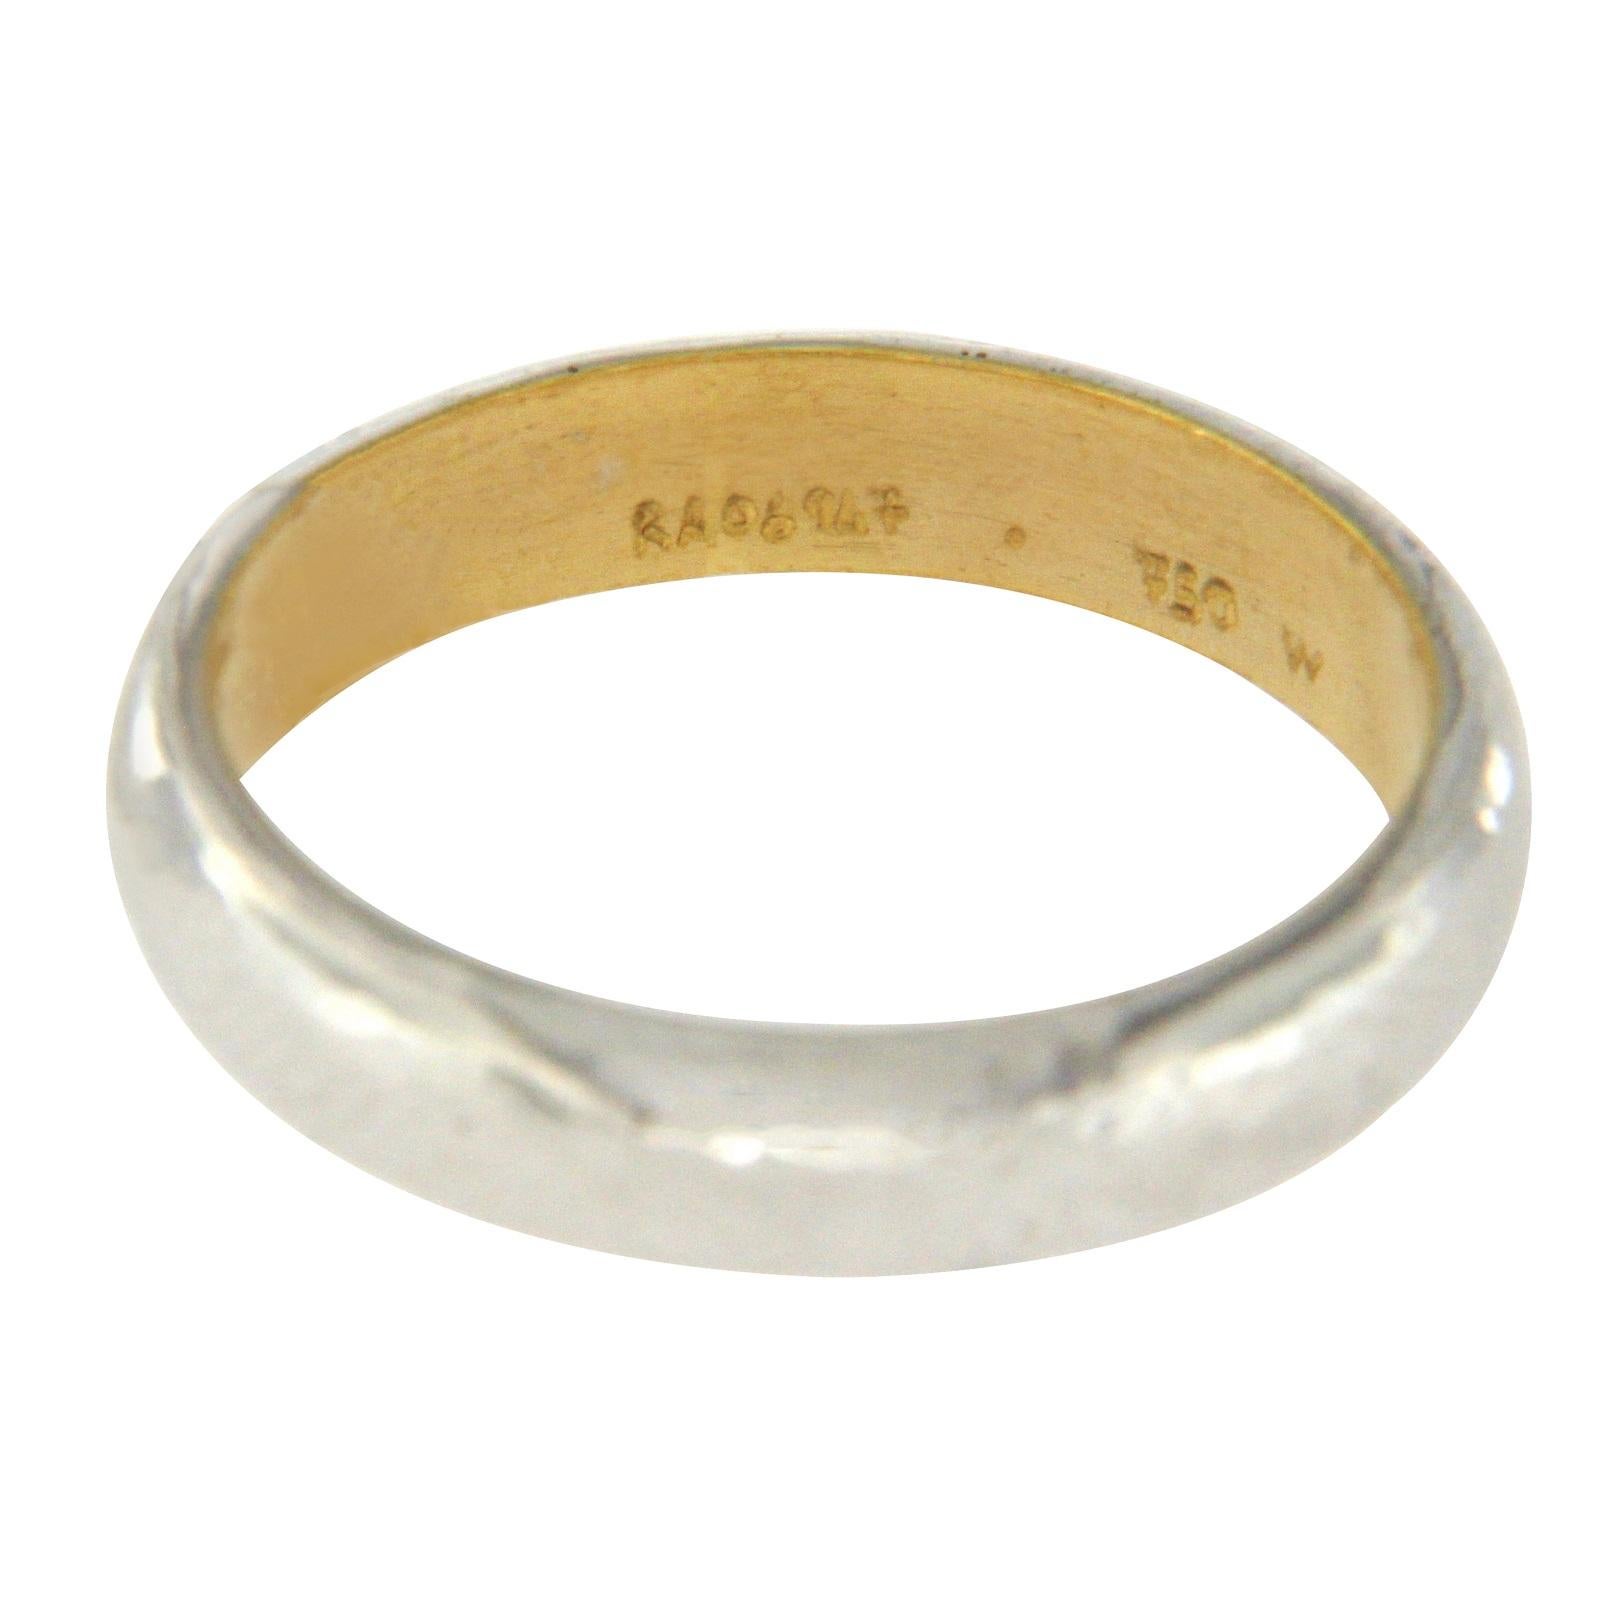 Type: Ring
Top: 4 mm
Band Width: 4 mm
Metal: Gold
Metal Purity: 24K and 18K
Size:6.5
Hallmarks: Gurhan
Total Weight: 4.5 Grams
Stone Type: None
Condition: New
Stock Number: E115